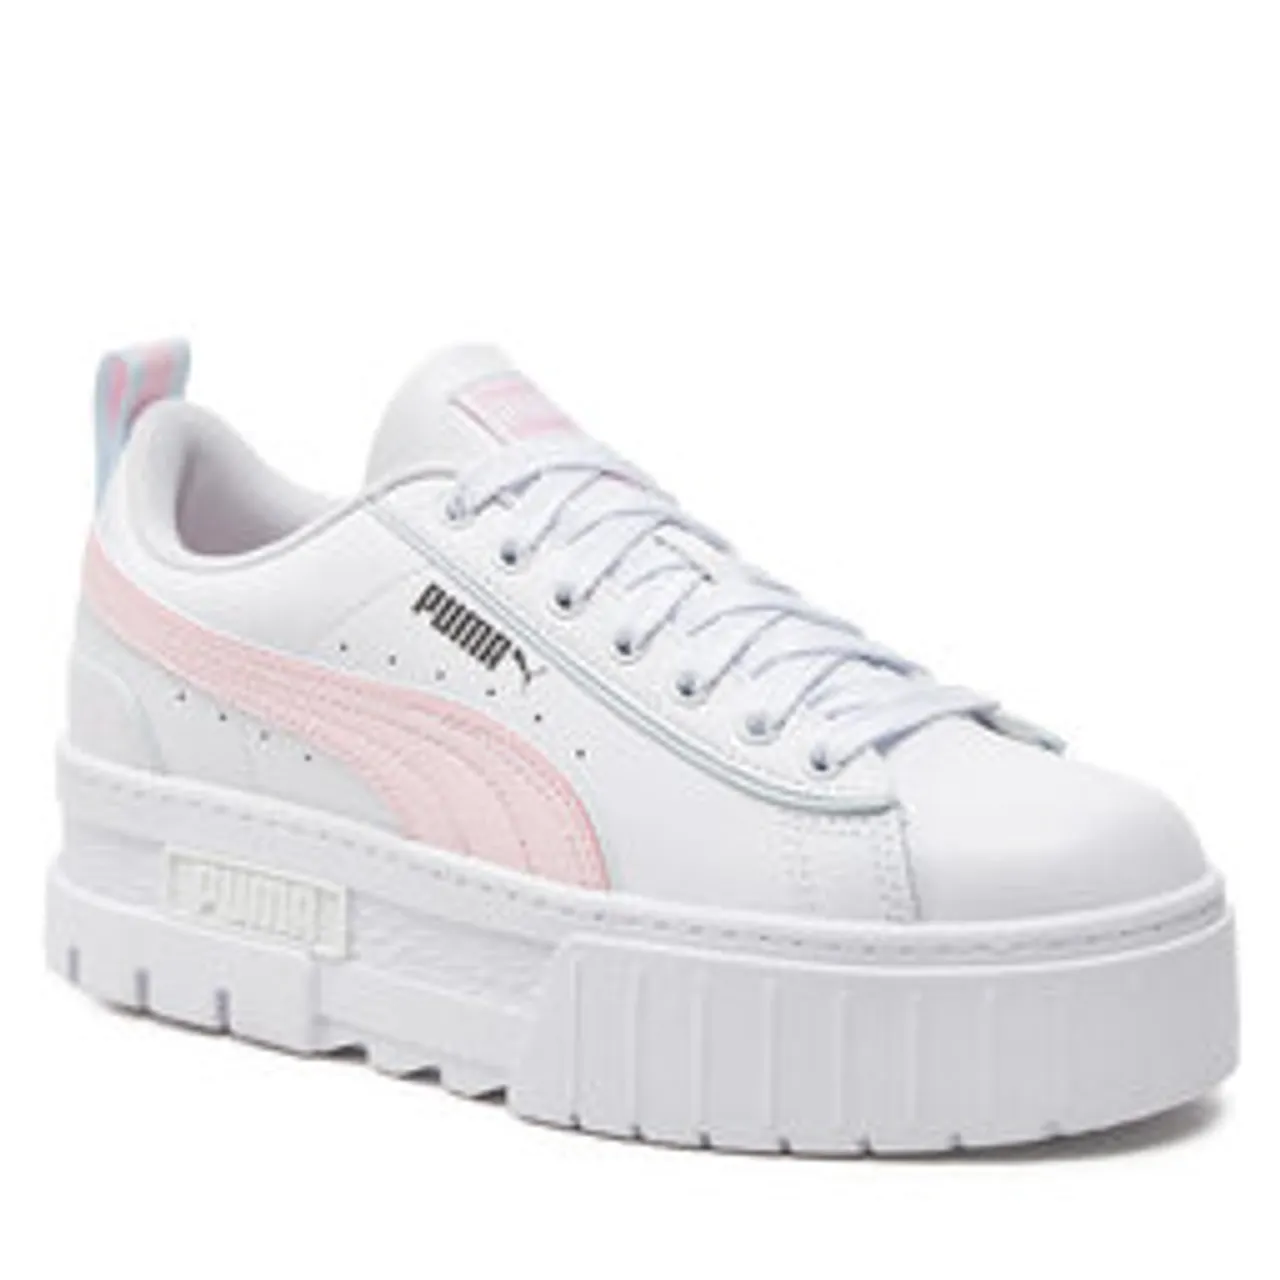 Sneakers Puma Mayze Lth Piping Jr 396664-02 Puma White/Whisp Of Pink/Dewdrop